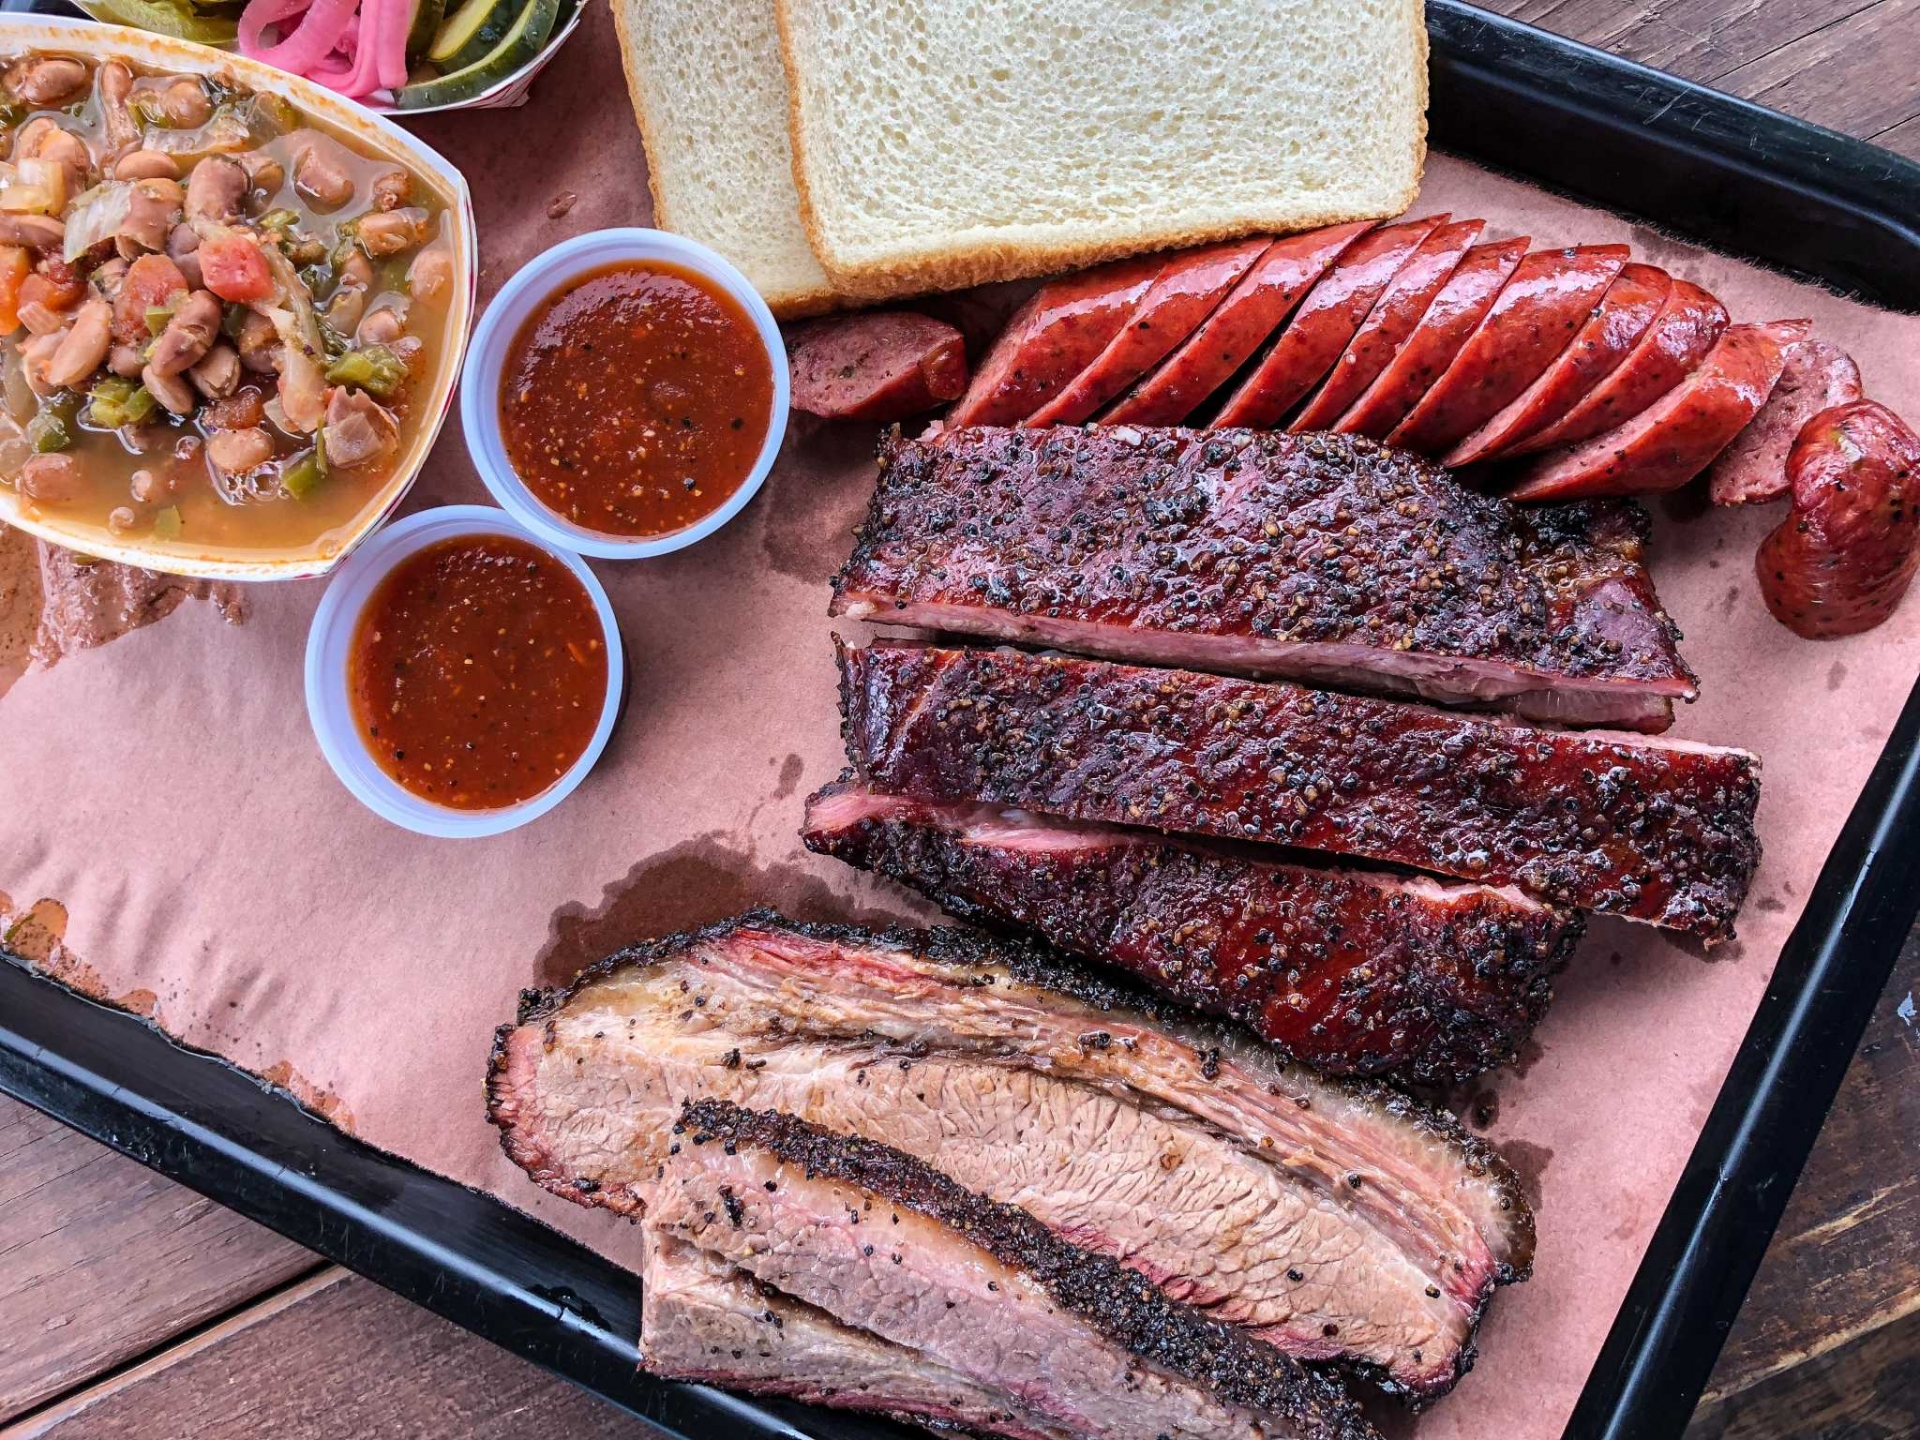 Eat Like a Texan: 6 Foods Everyone New to Texas Should Try